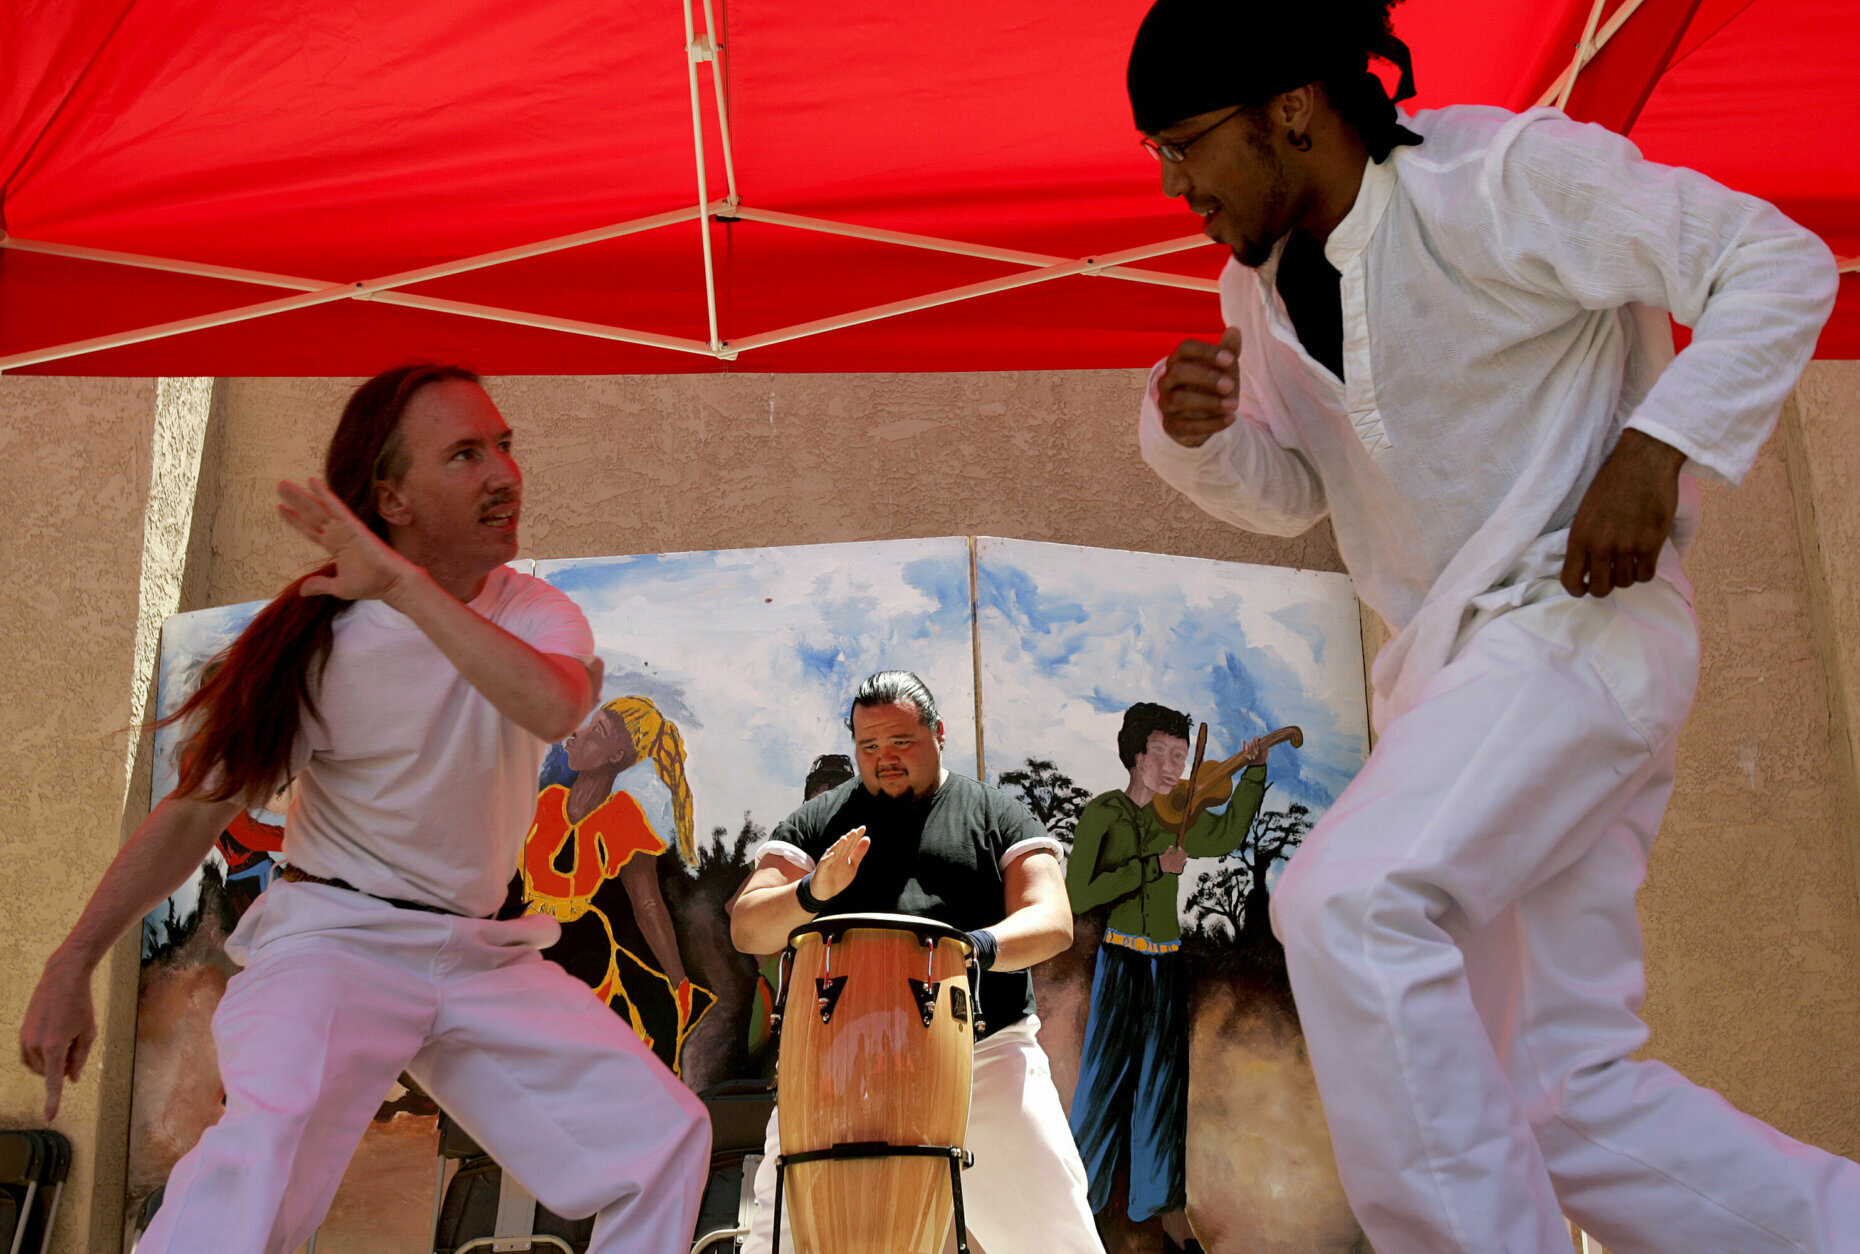 Daryl McCullick, left, Ivan Pena, center, and Tariq Sabur perform Capoeira Angola, an African Brazilian martial art, at the annual Juneteenth festival in Phoenix, Saturday, June 17, 2006. Juneteenth is the traditional celebration of the announcement in Texas in 1865 that slavery was ended. (AP Photo/Khampha Bouahanh)